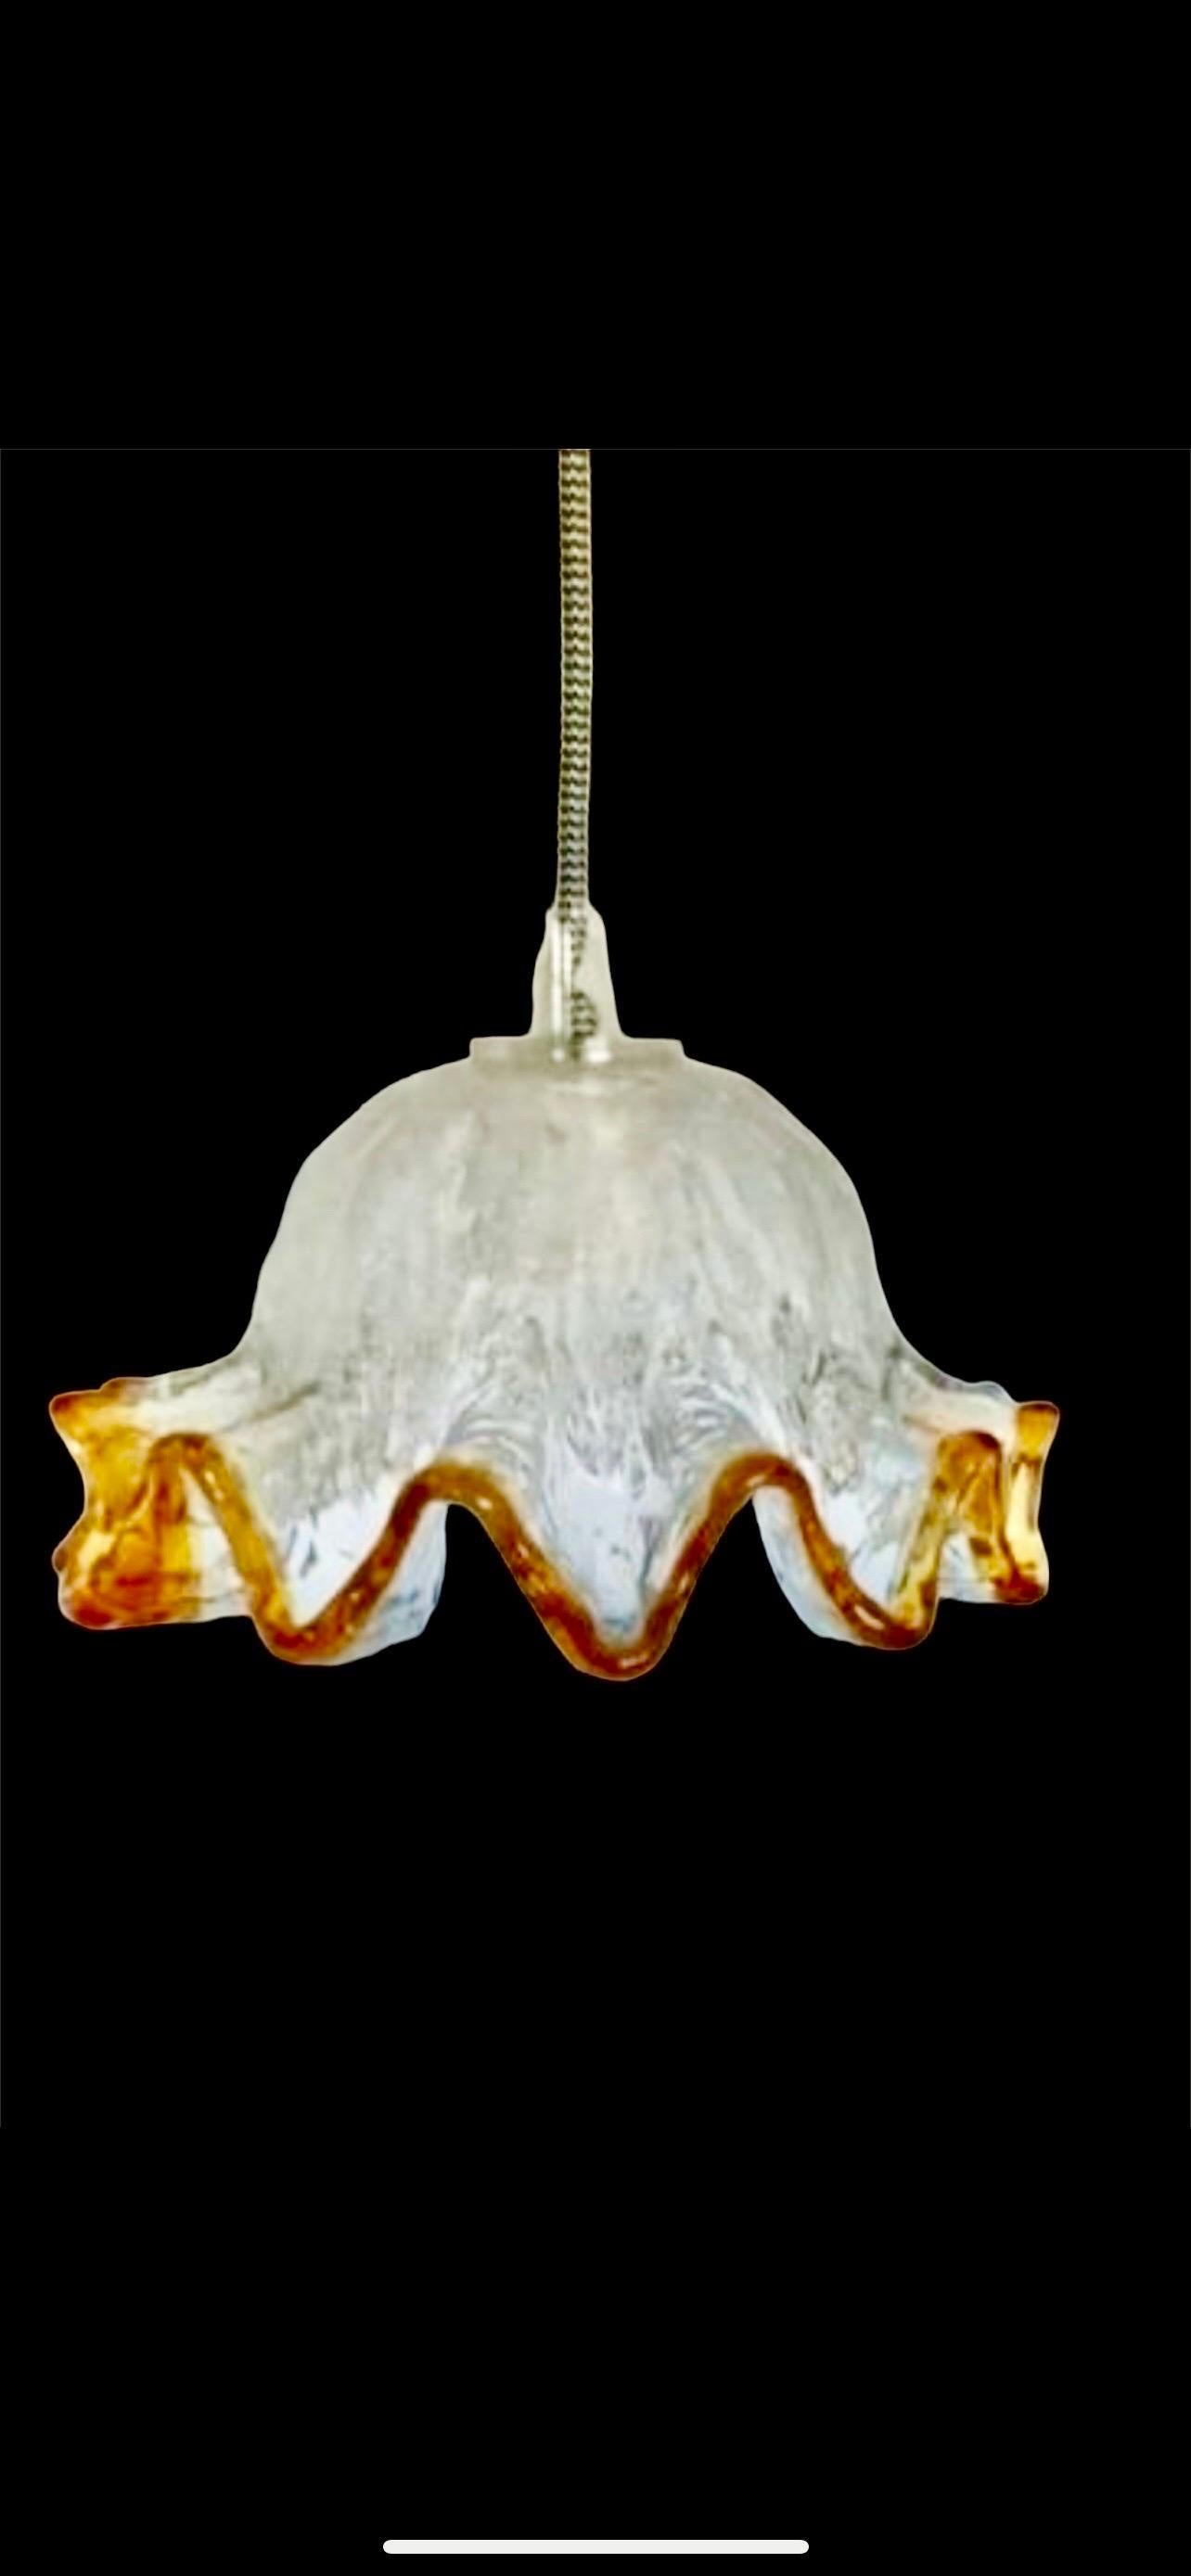 Mid-Century Modern Mazzega Pendant Pair with Glass Murano Bicolore, Italy, 1970 For Sale